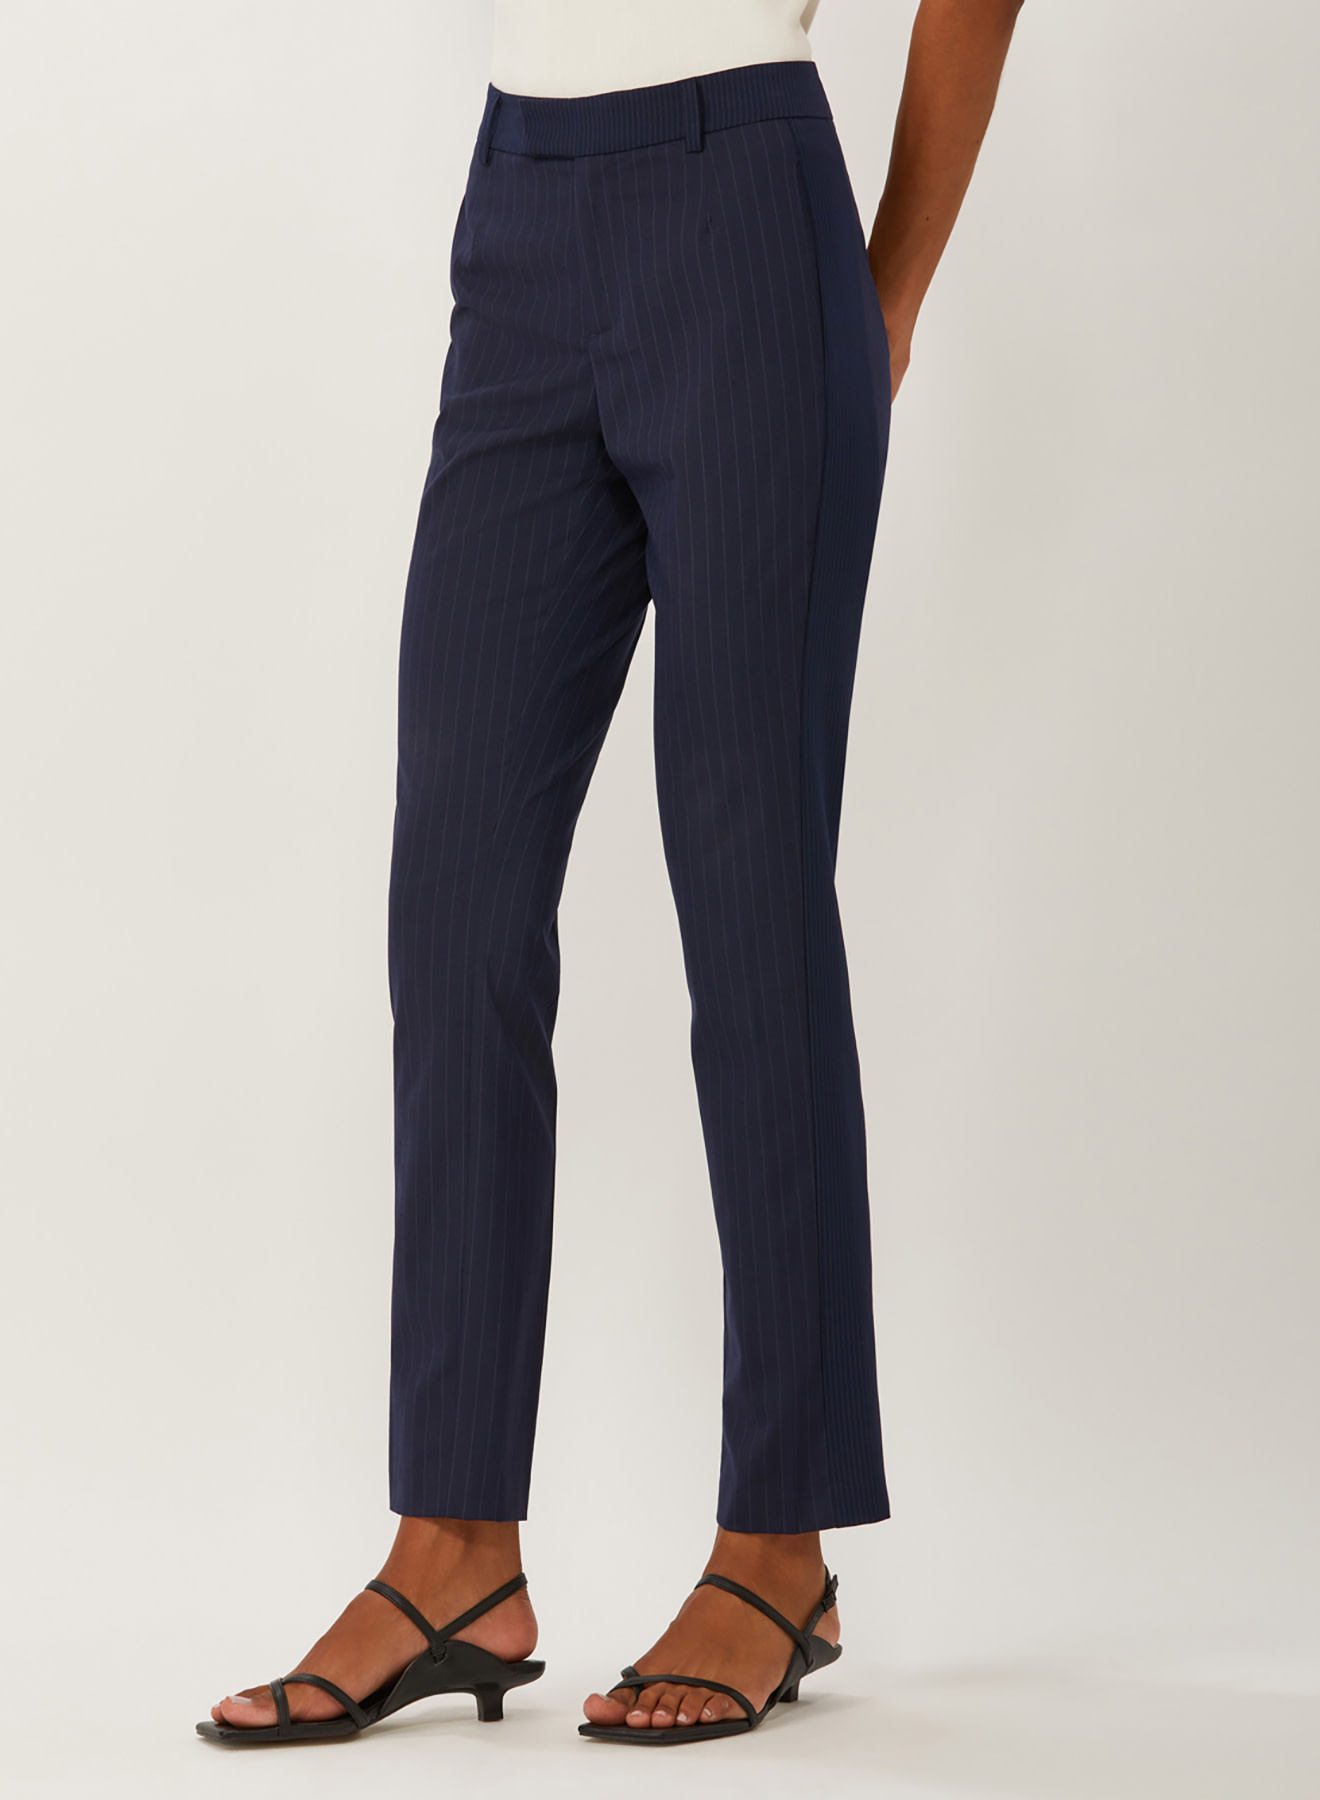 Trousers in navy with pinstripes - EDUARD DRESSLER